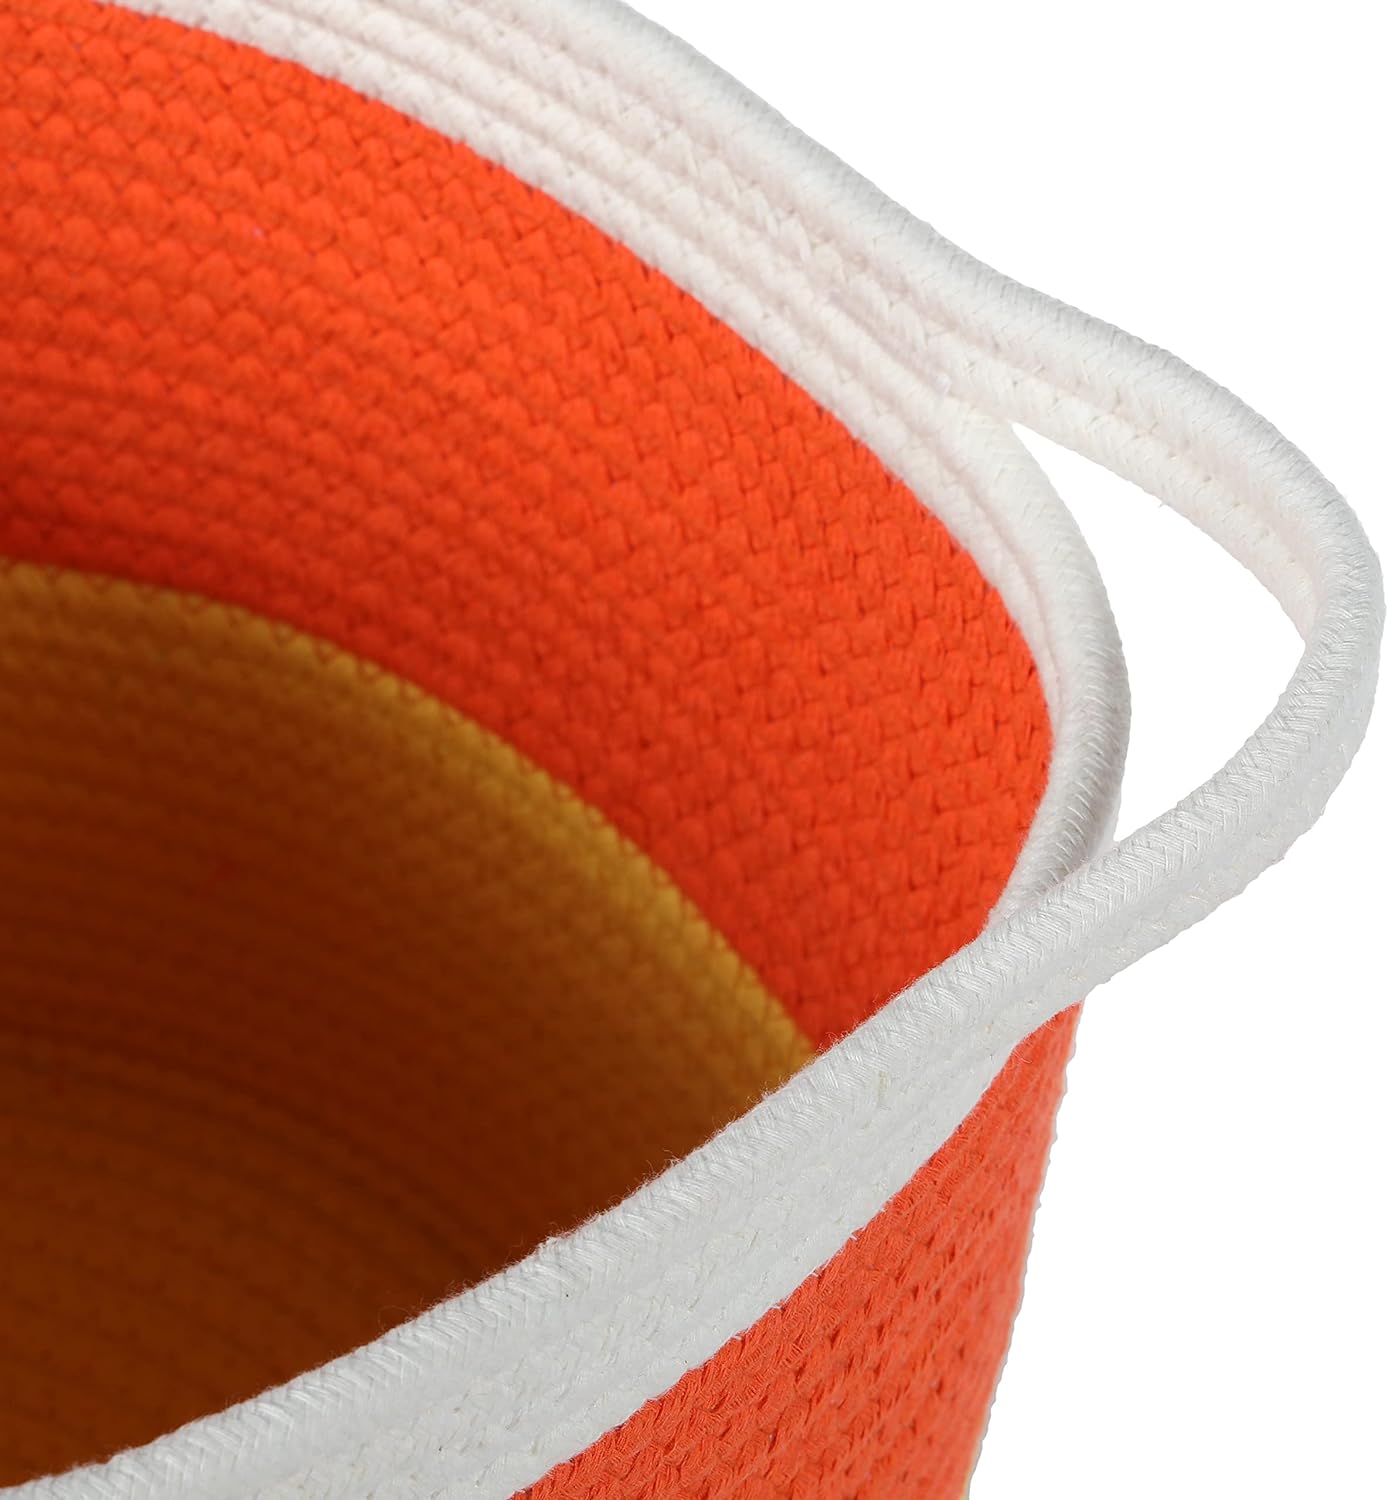 Midlee Candy Corn Rope Basket